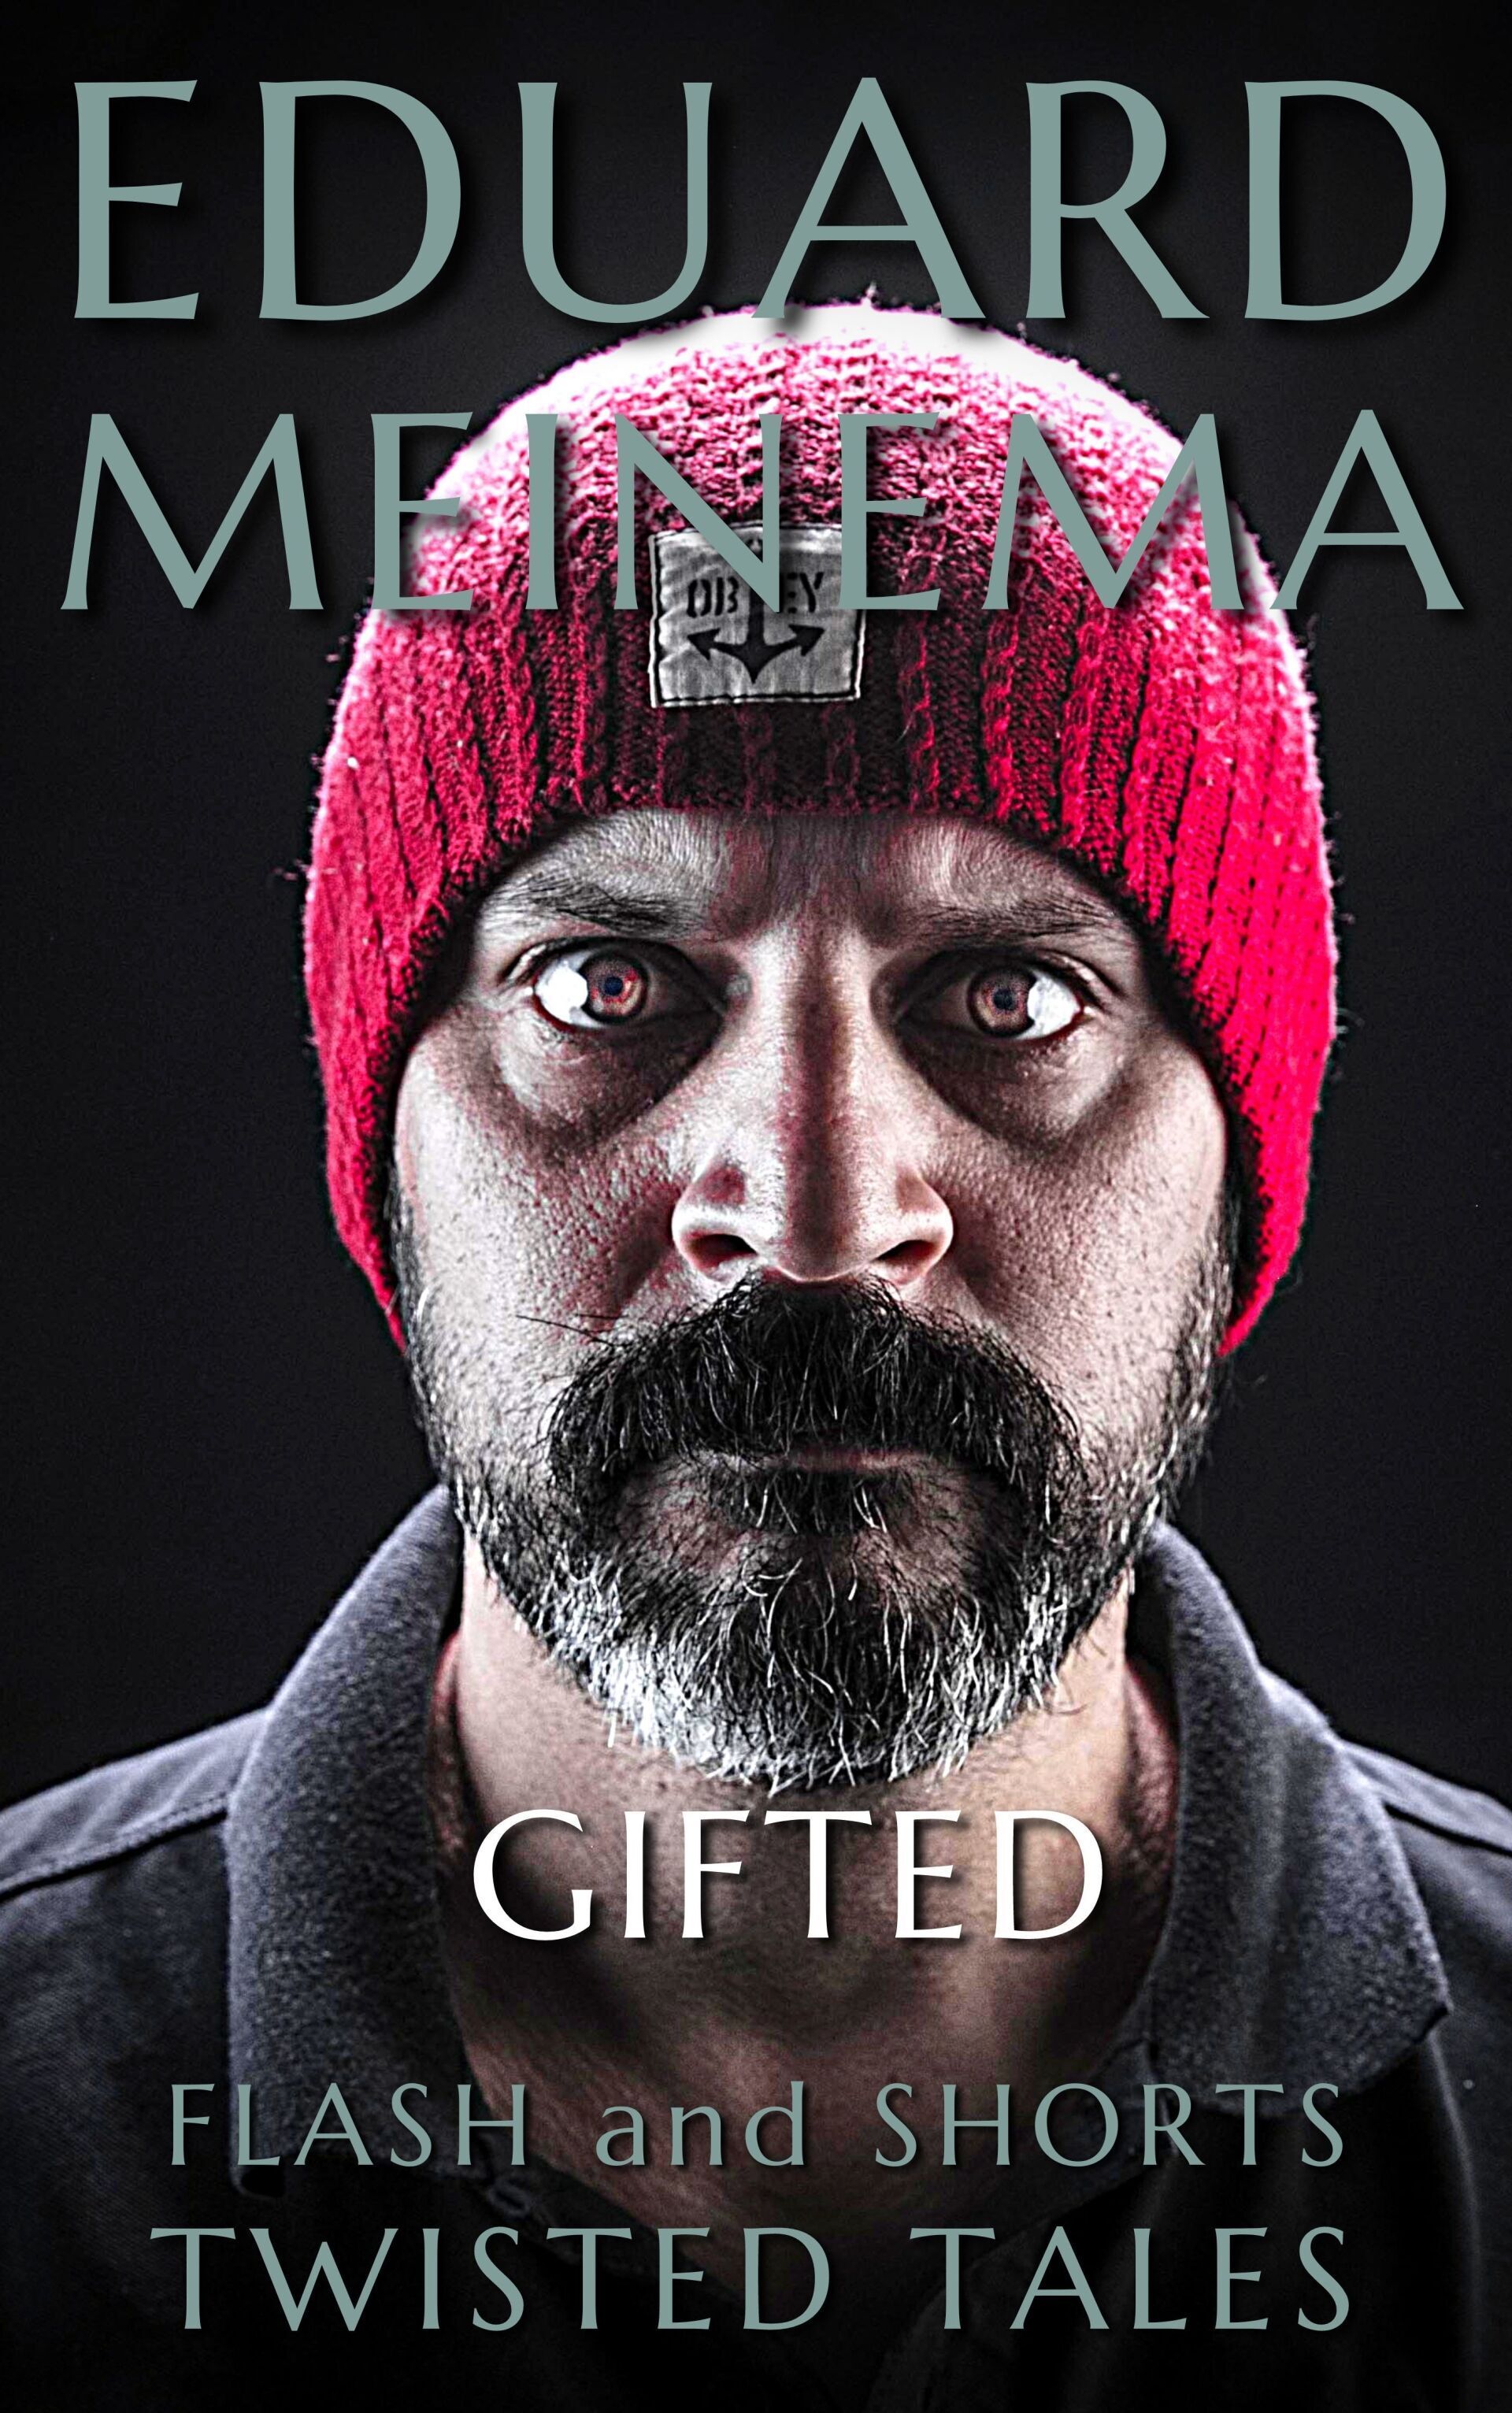 Gifted, short story by Eduard Meinema.